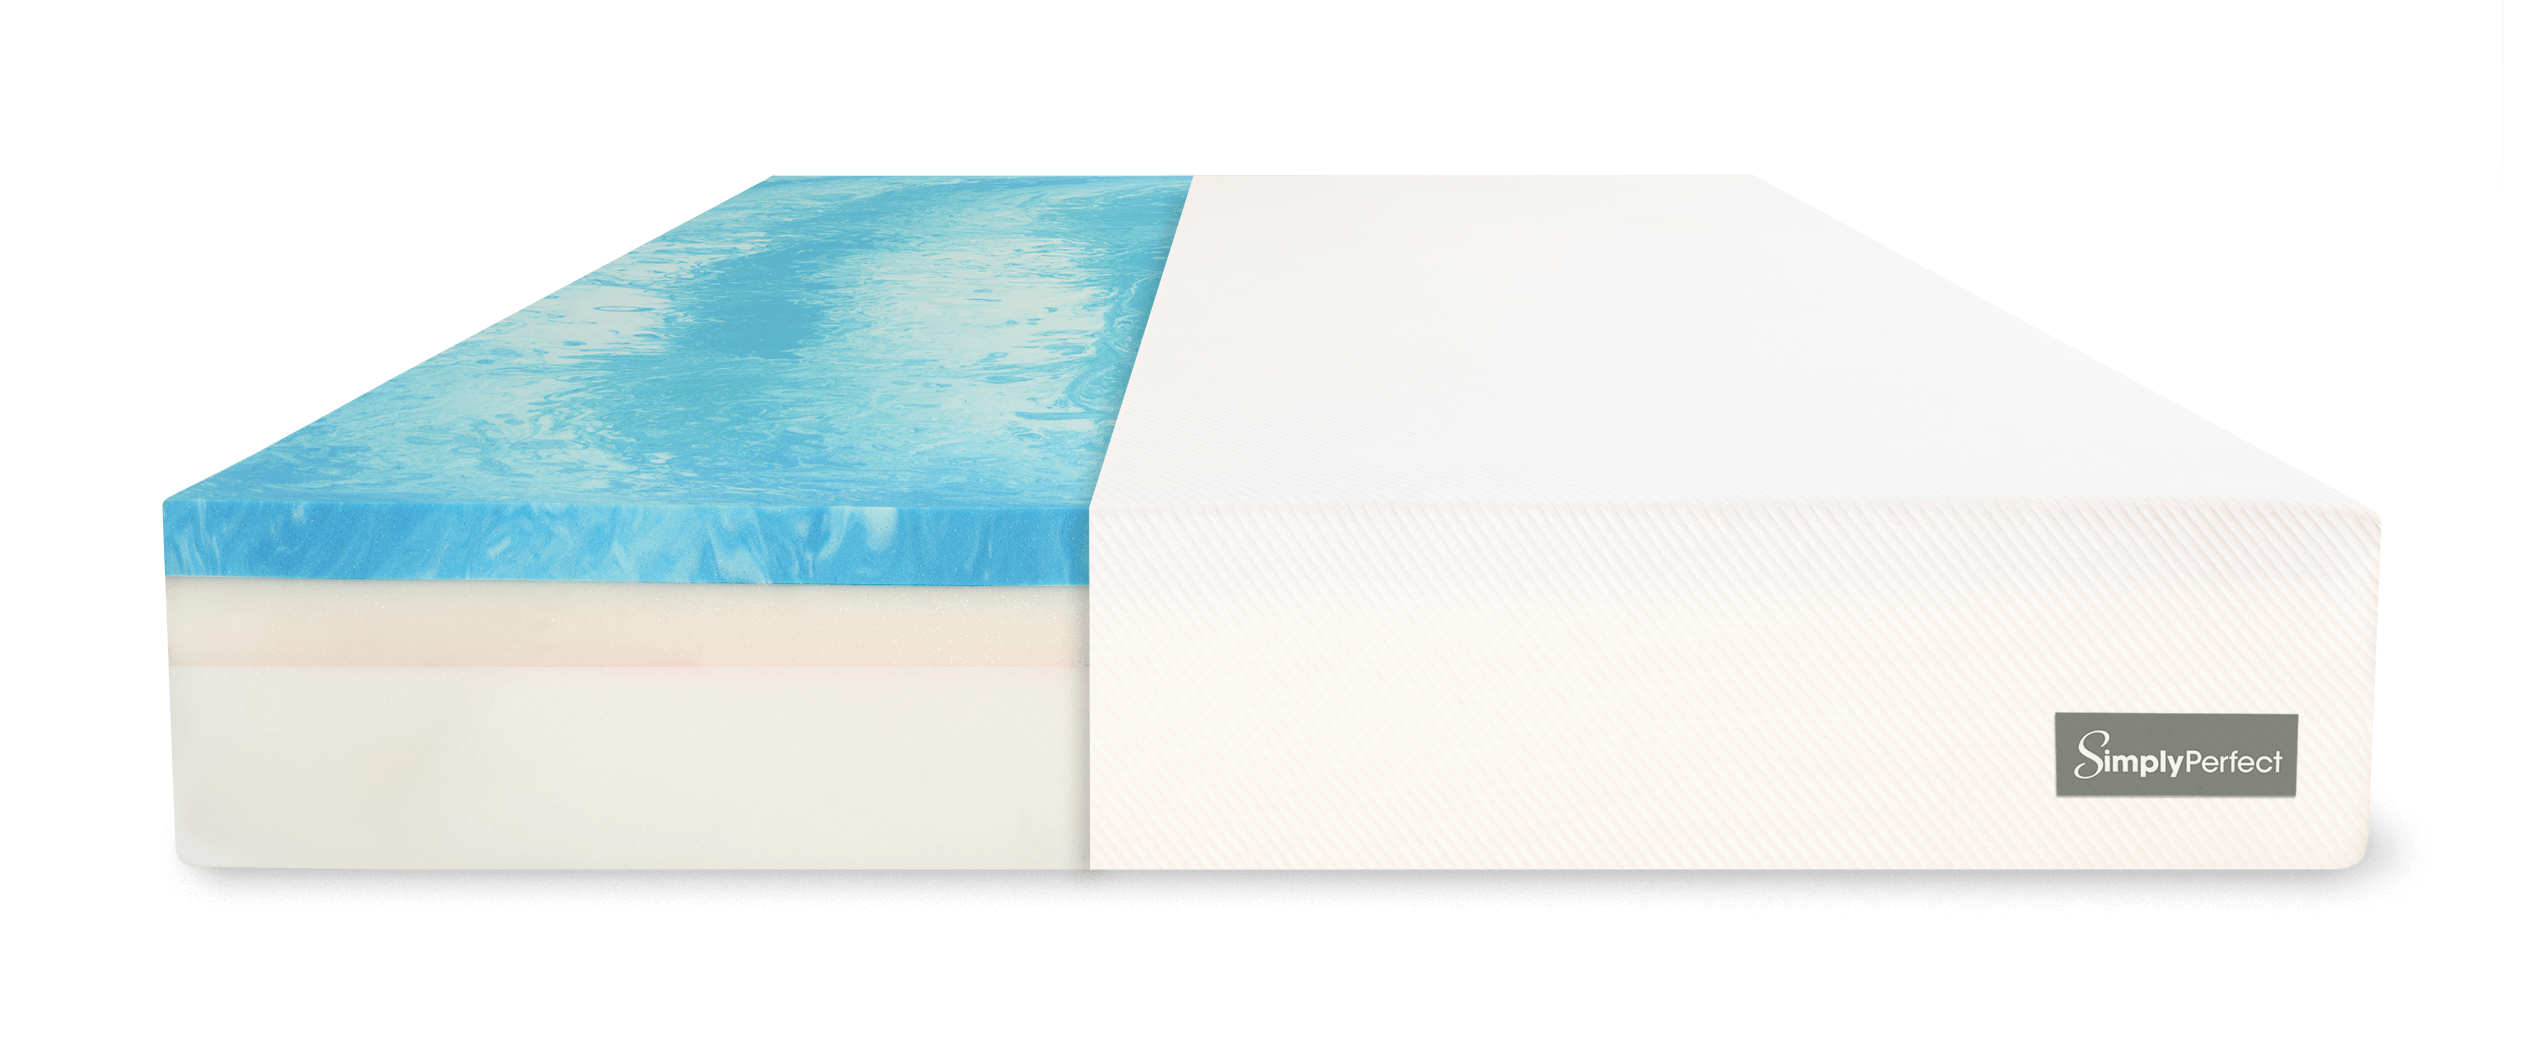 The 3 layers of the Simply Perfect mattress